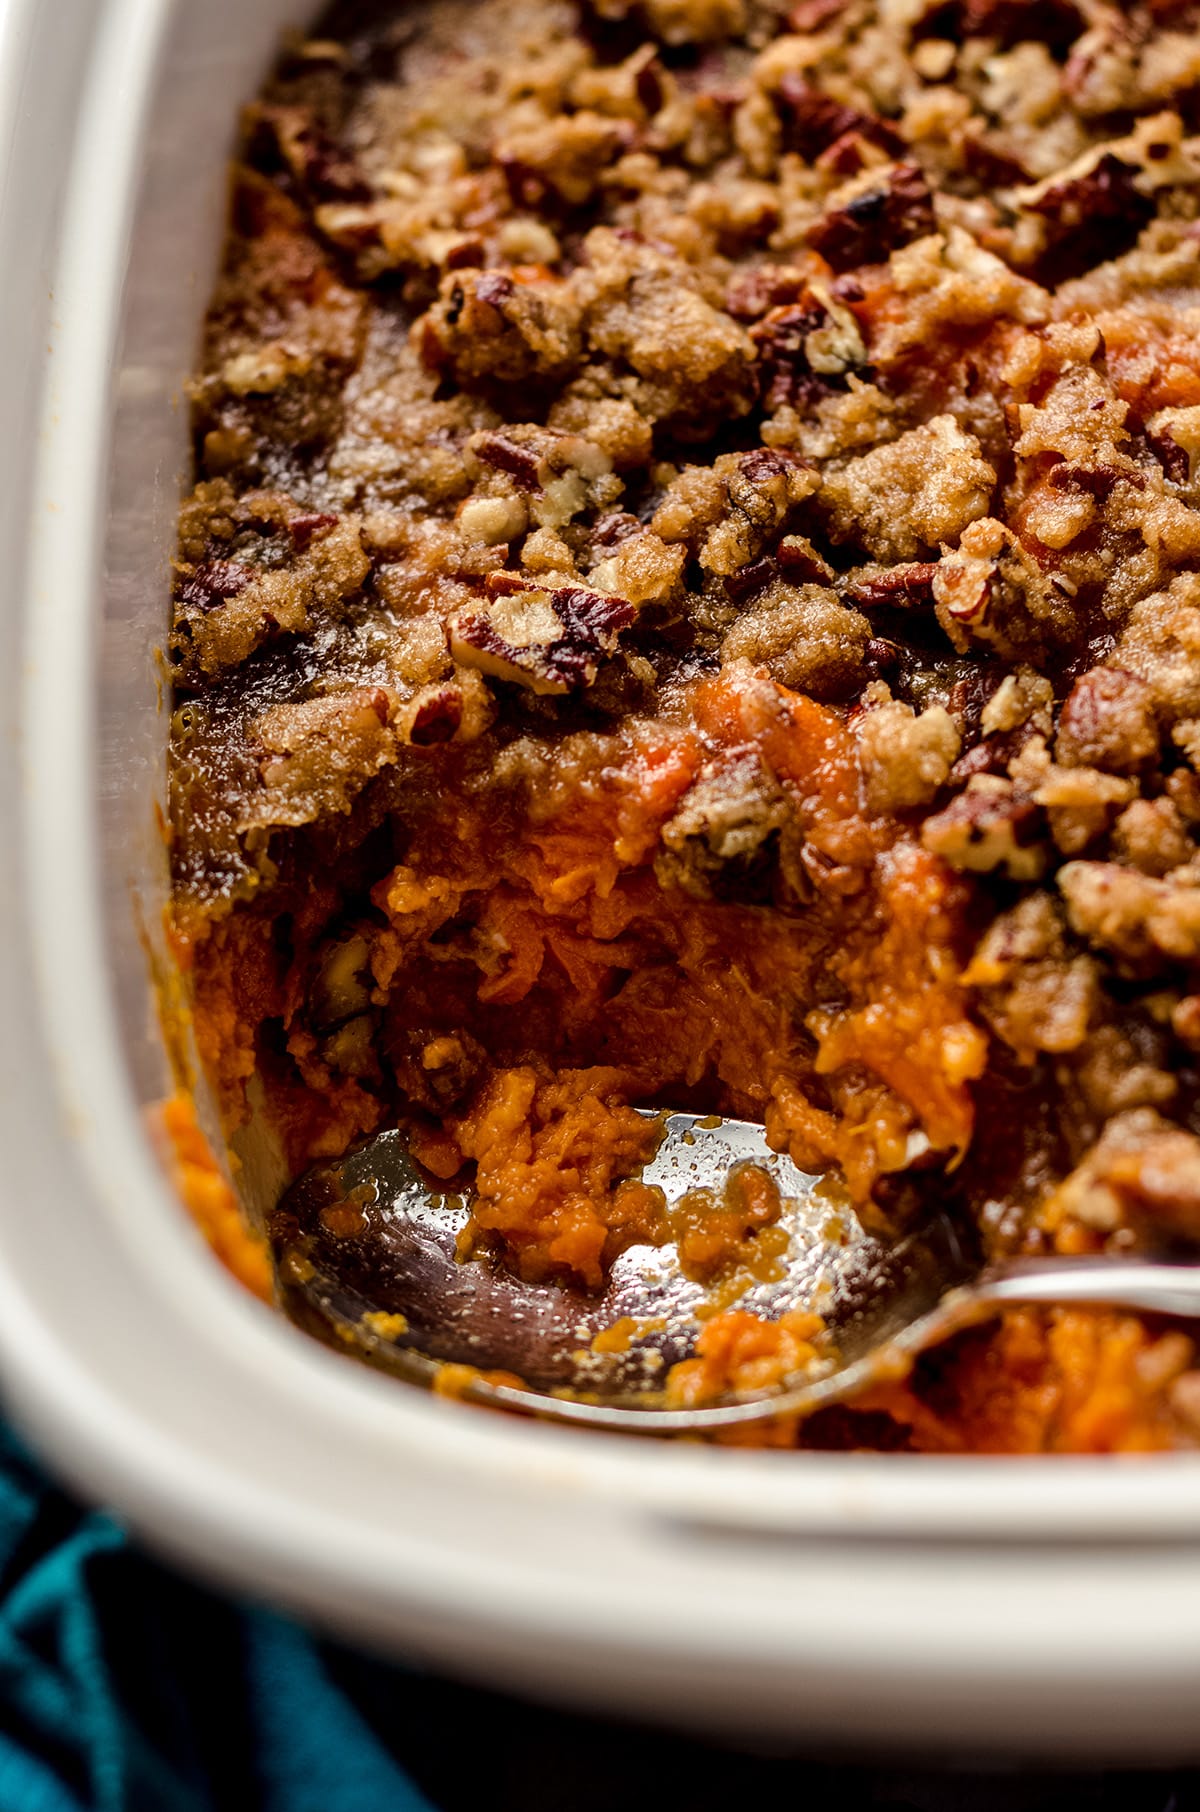 A sweet potato casserole topped with pecans.